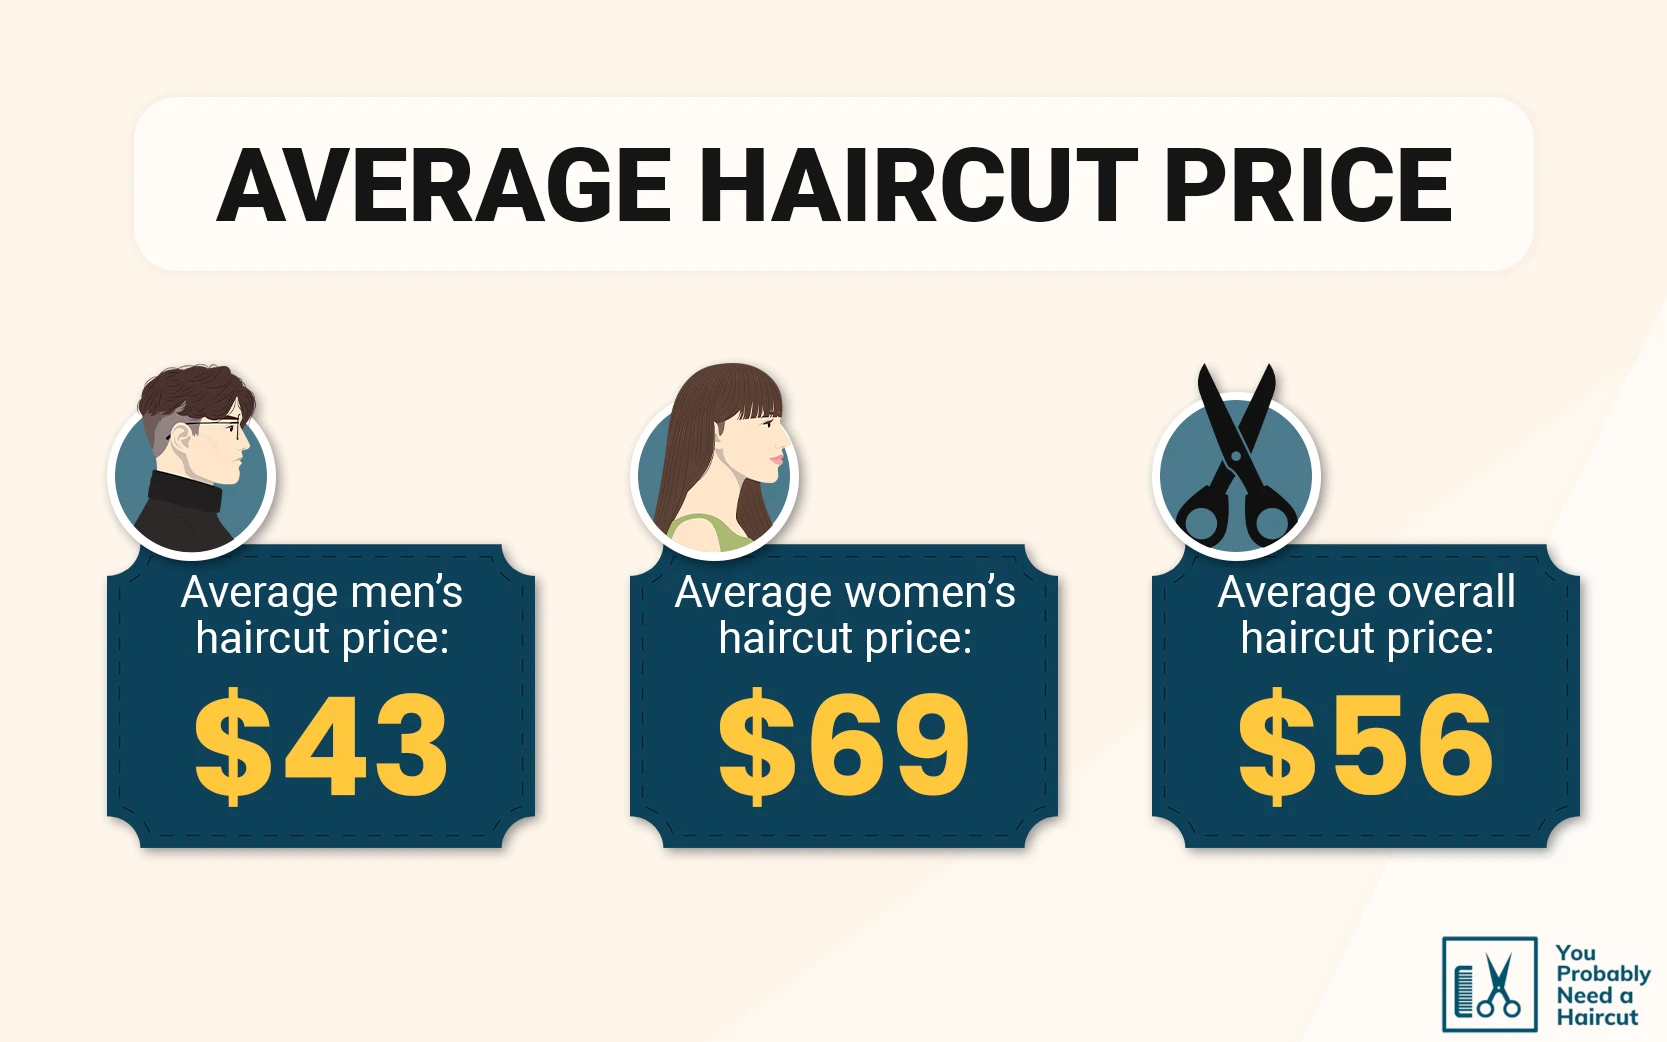 Graphic titled Average Haircut Price with an average men's haircut price, average women's haircut price, and national overall average